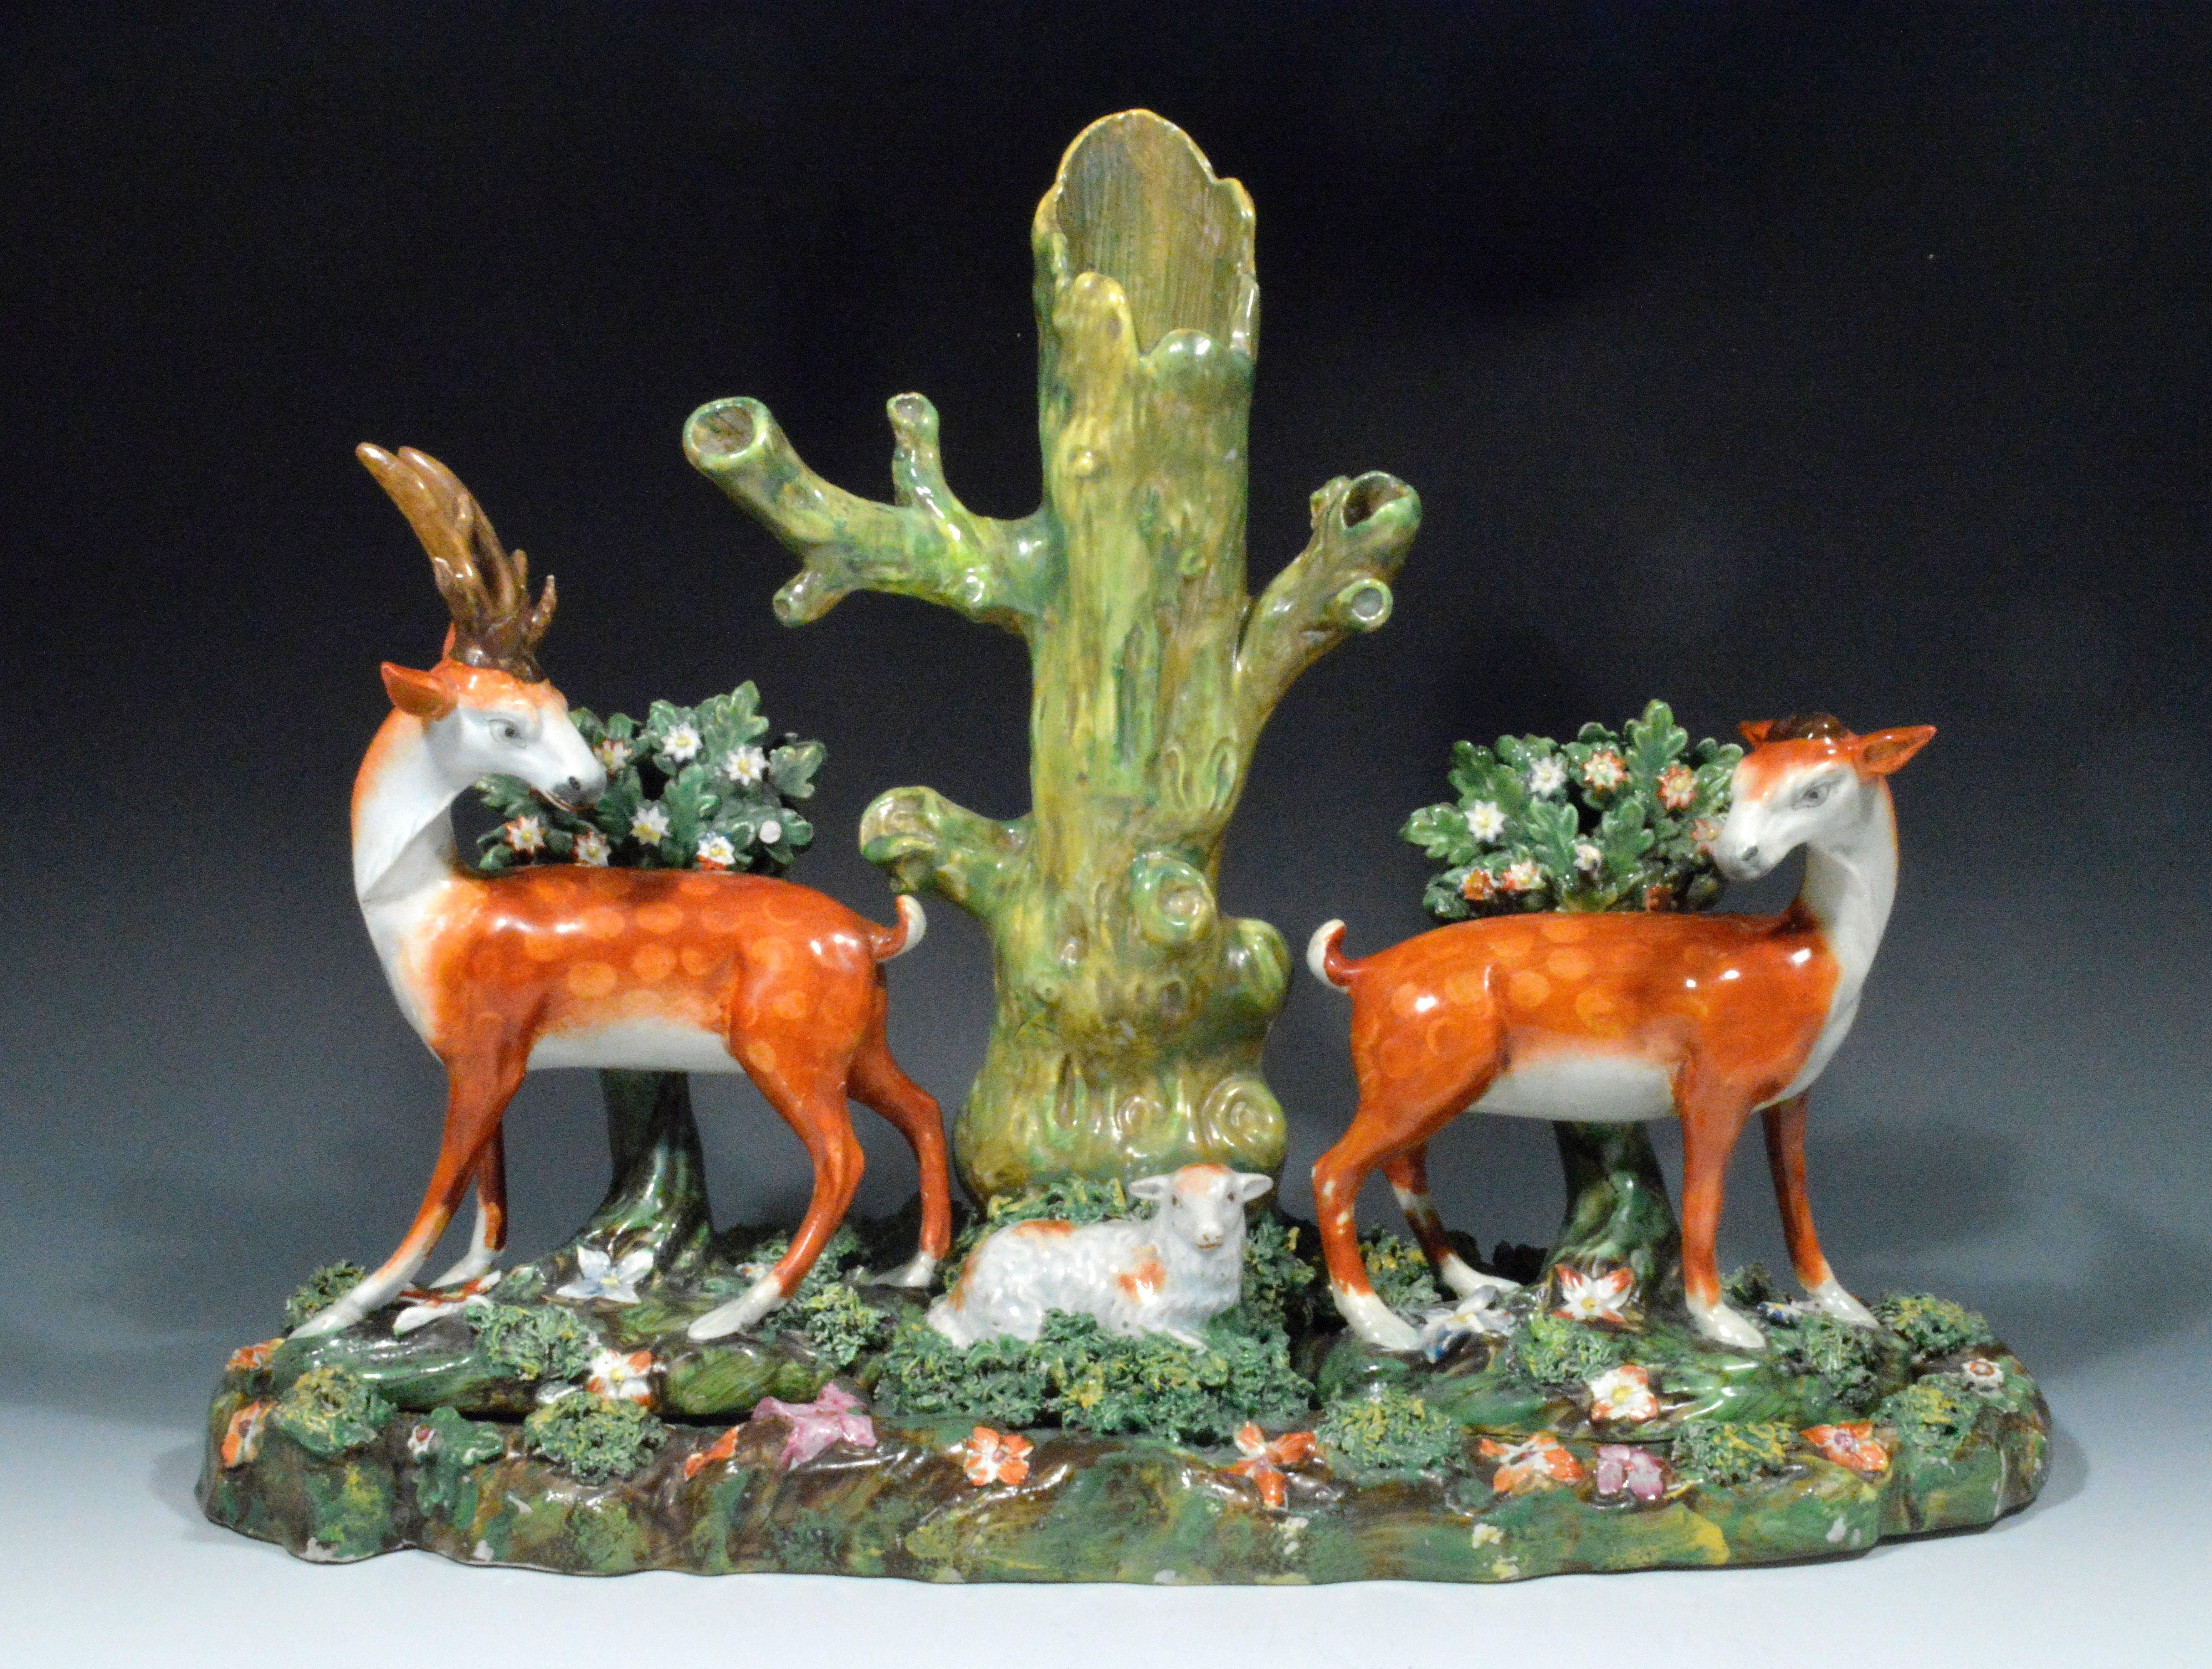 This remarkable and rare Staffordshire pearlware large group is particularly rare with the stag and doe being removable being placed into insets on the oval base. The group depicts two large figures of a stag and doe facing each other either side of